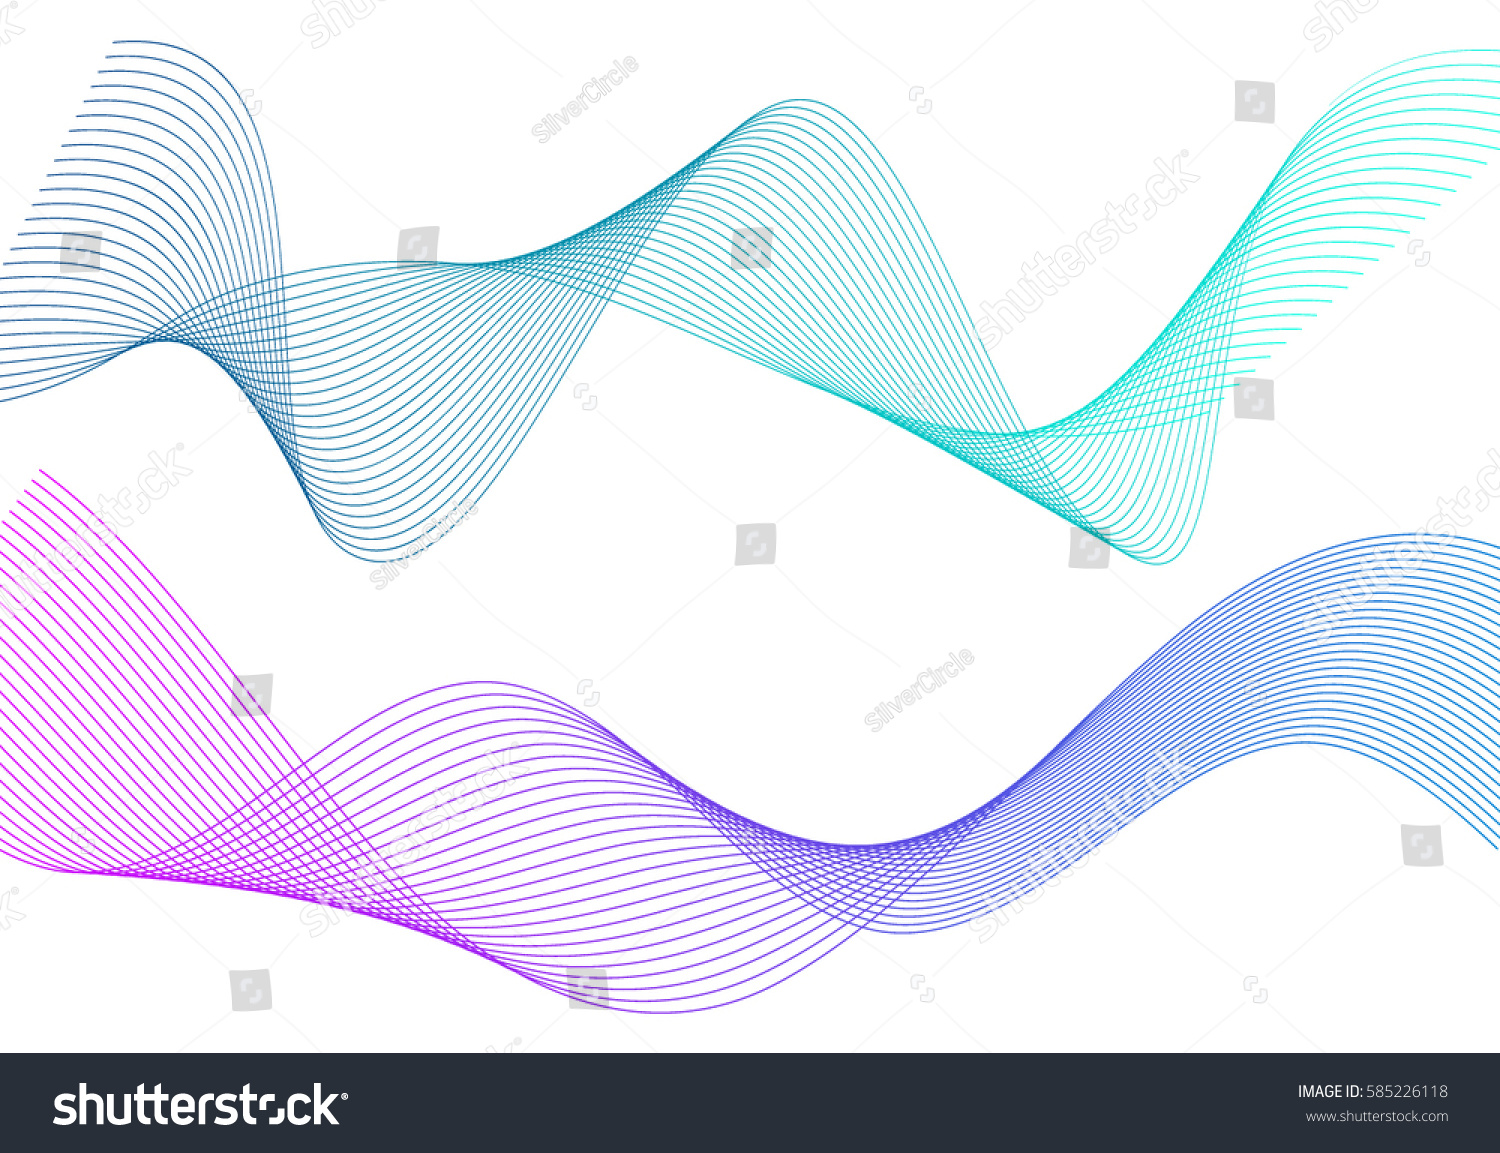 SVG of Wave of the many colored lines. Abstract wavy stripes on a white background isolated. Creative line art. Vector illustration EPS 10. Design elements created using the Blend Tool. Curved smooth tape svg